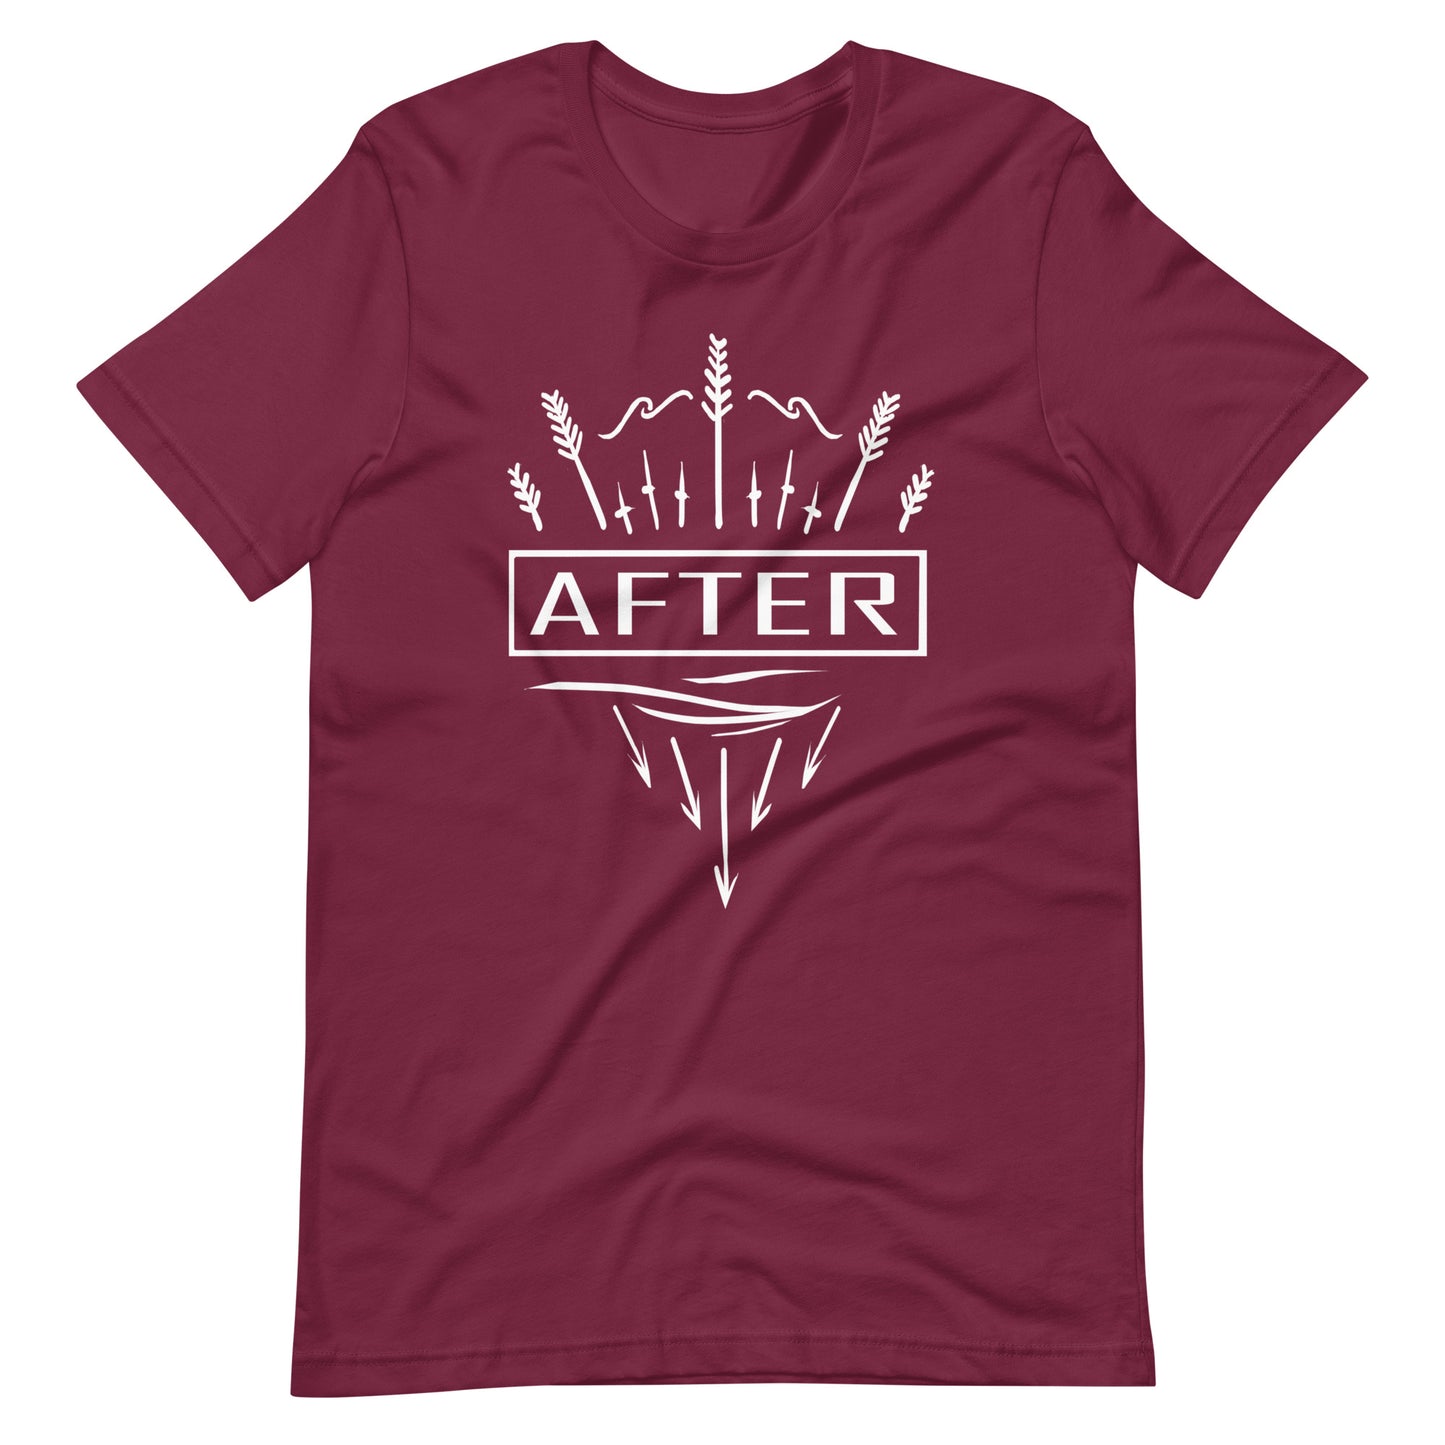 After - Men's t-shirt - Maroon Front